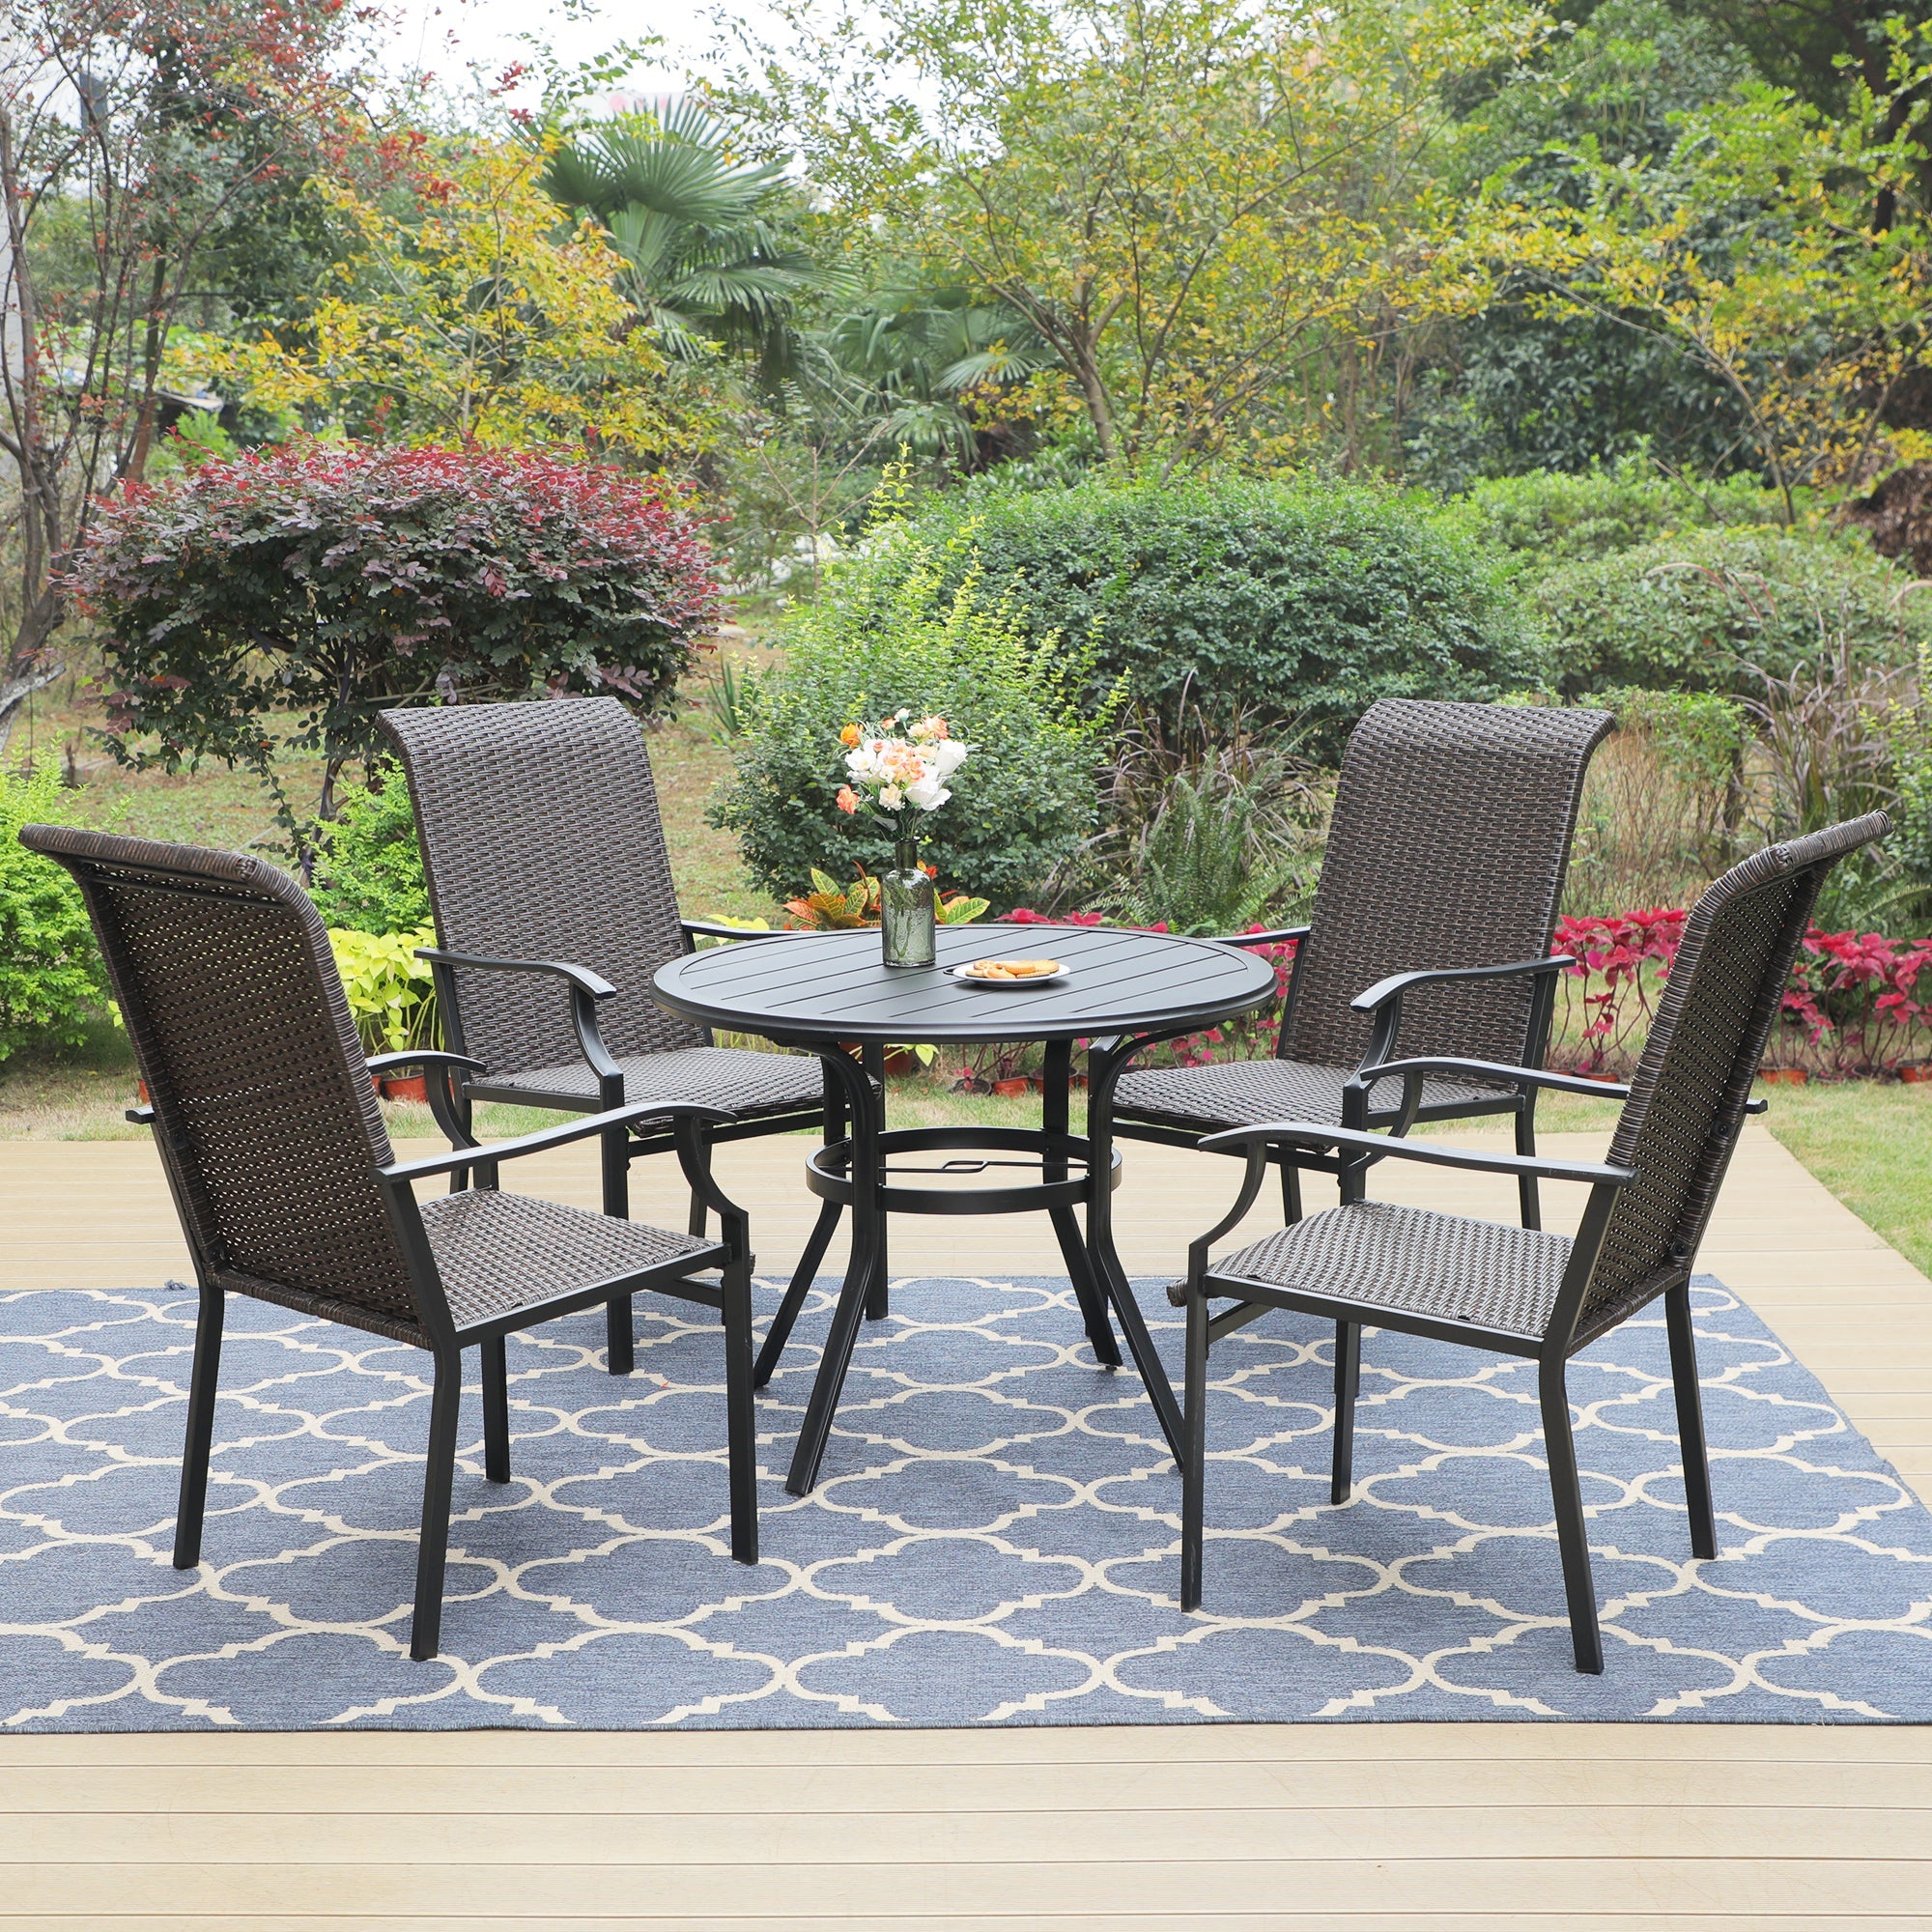 PHI VILLA 5-Piece Rattan Dining Chairs & Steel Round Table Outdoor Dining Set